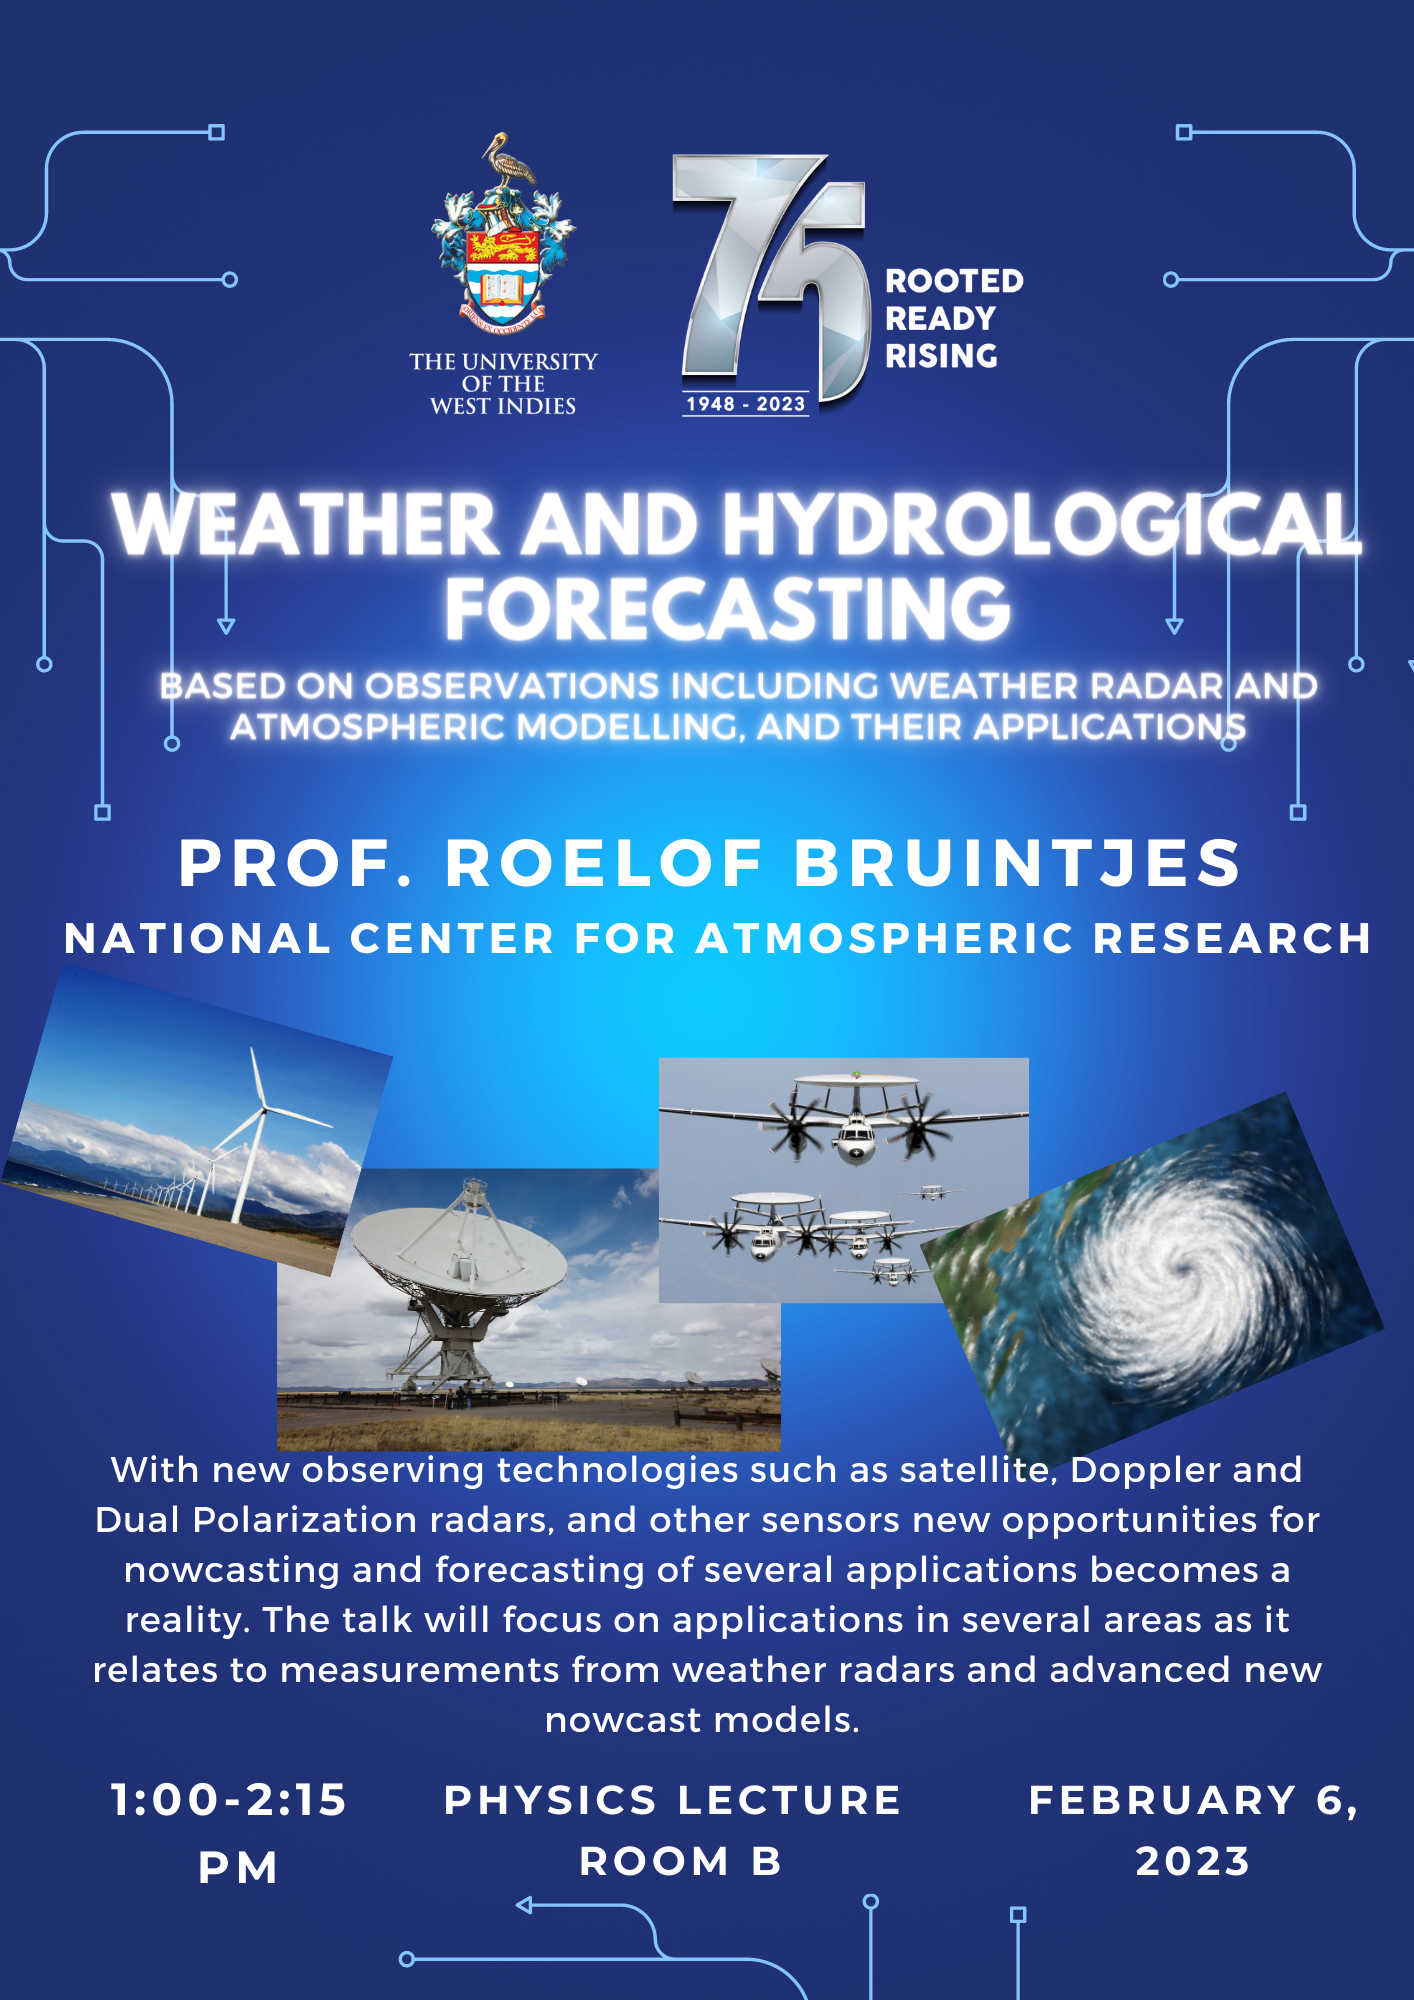 WEATHER AND HYDROLOGICAL NOWCASTING/FORECASTING BASED ON OBSERVATIONS 